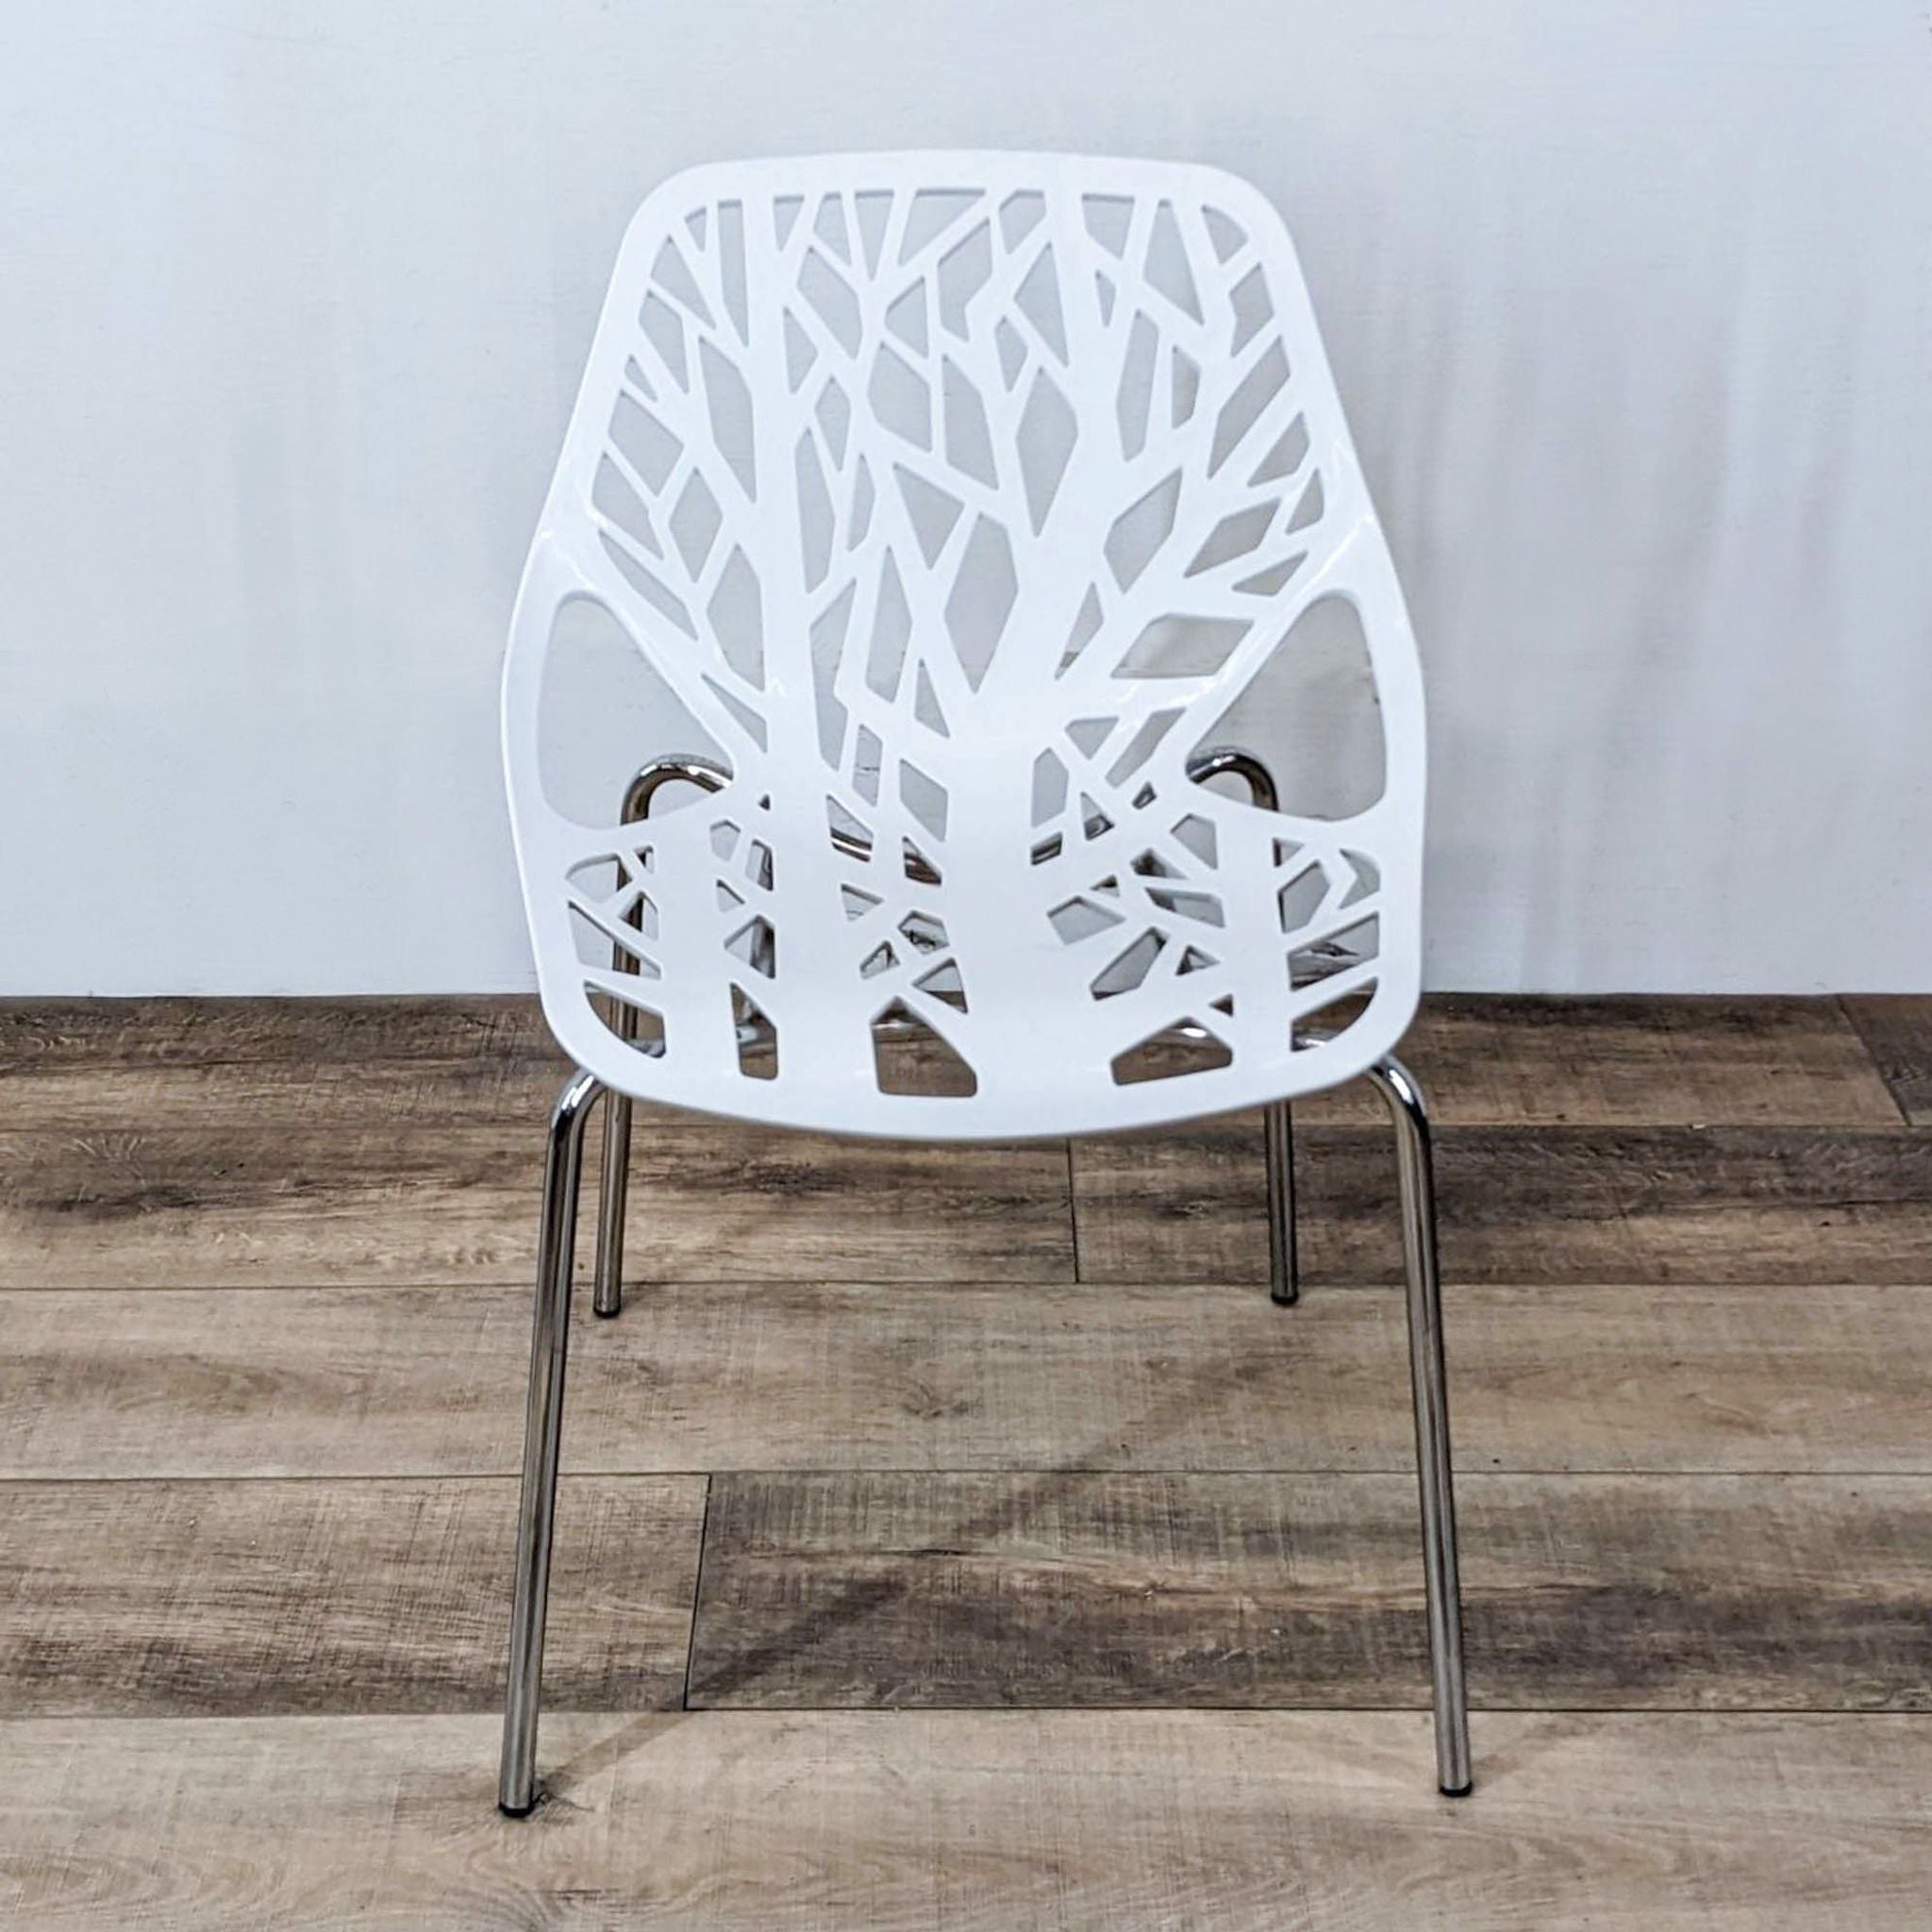 White Reperch dining chair with a tree branch-like backrest design and chrome legs, on wooden flooring.